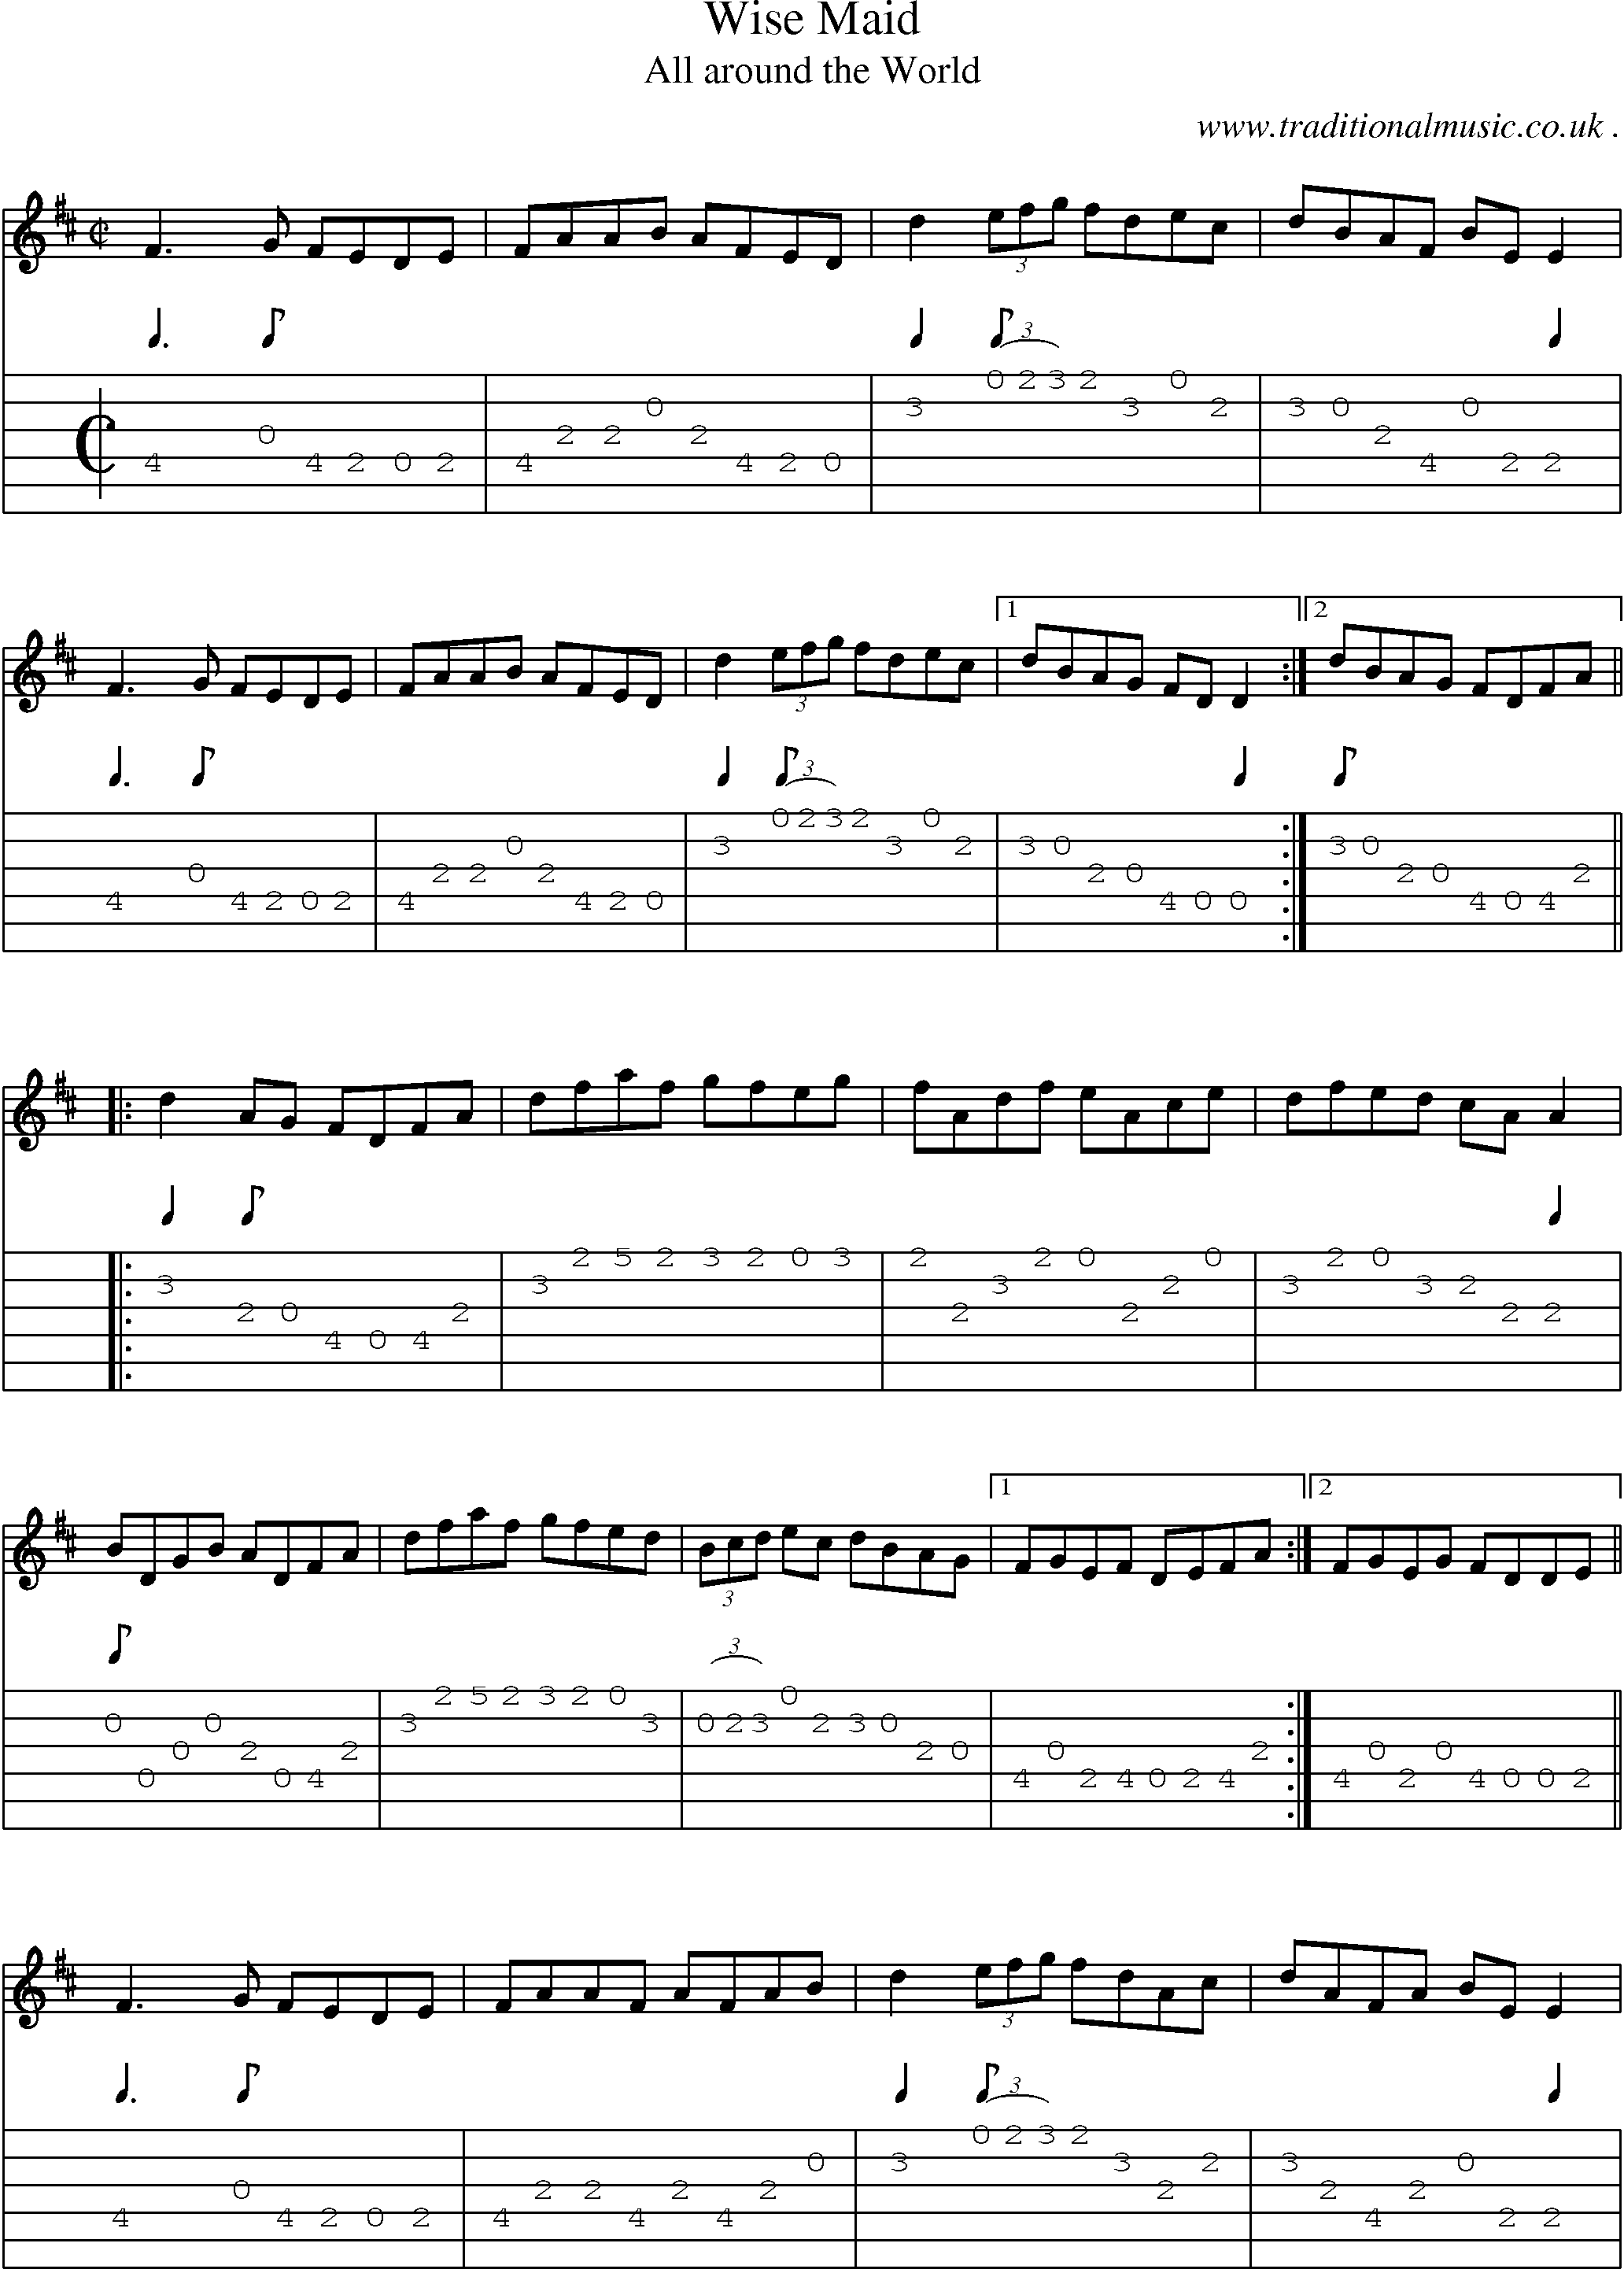 Sheet-Music and Guitar Tabs for Wise Maid